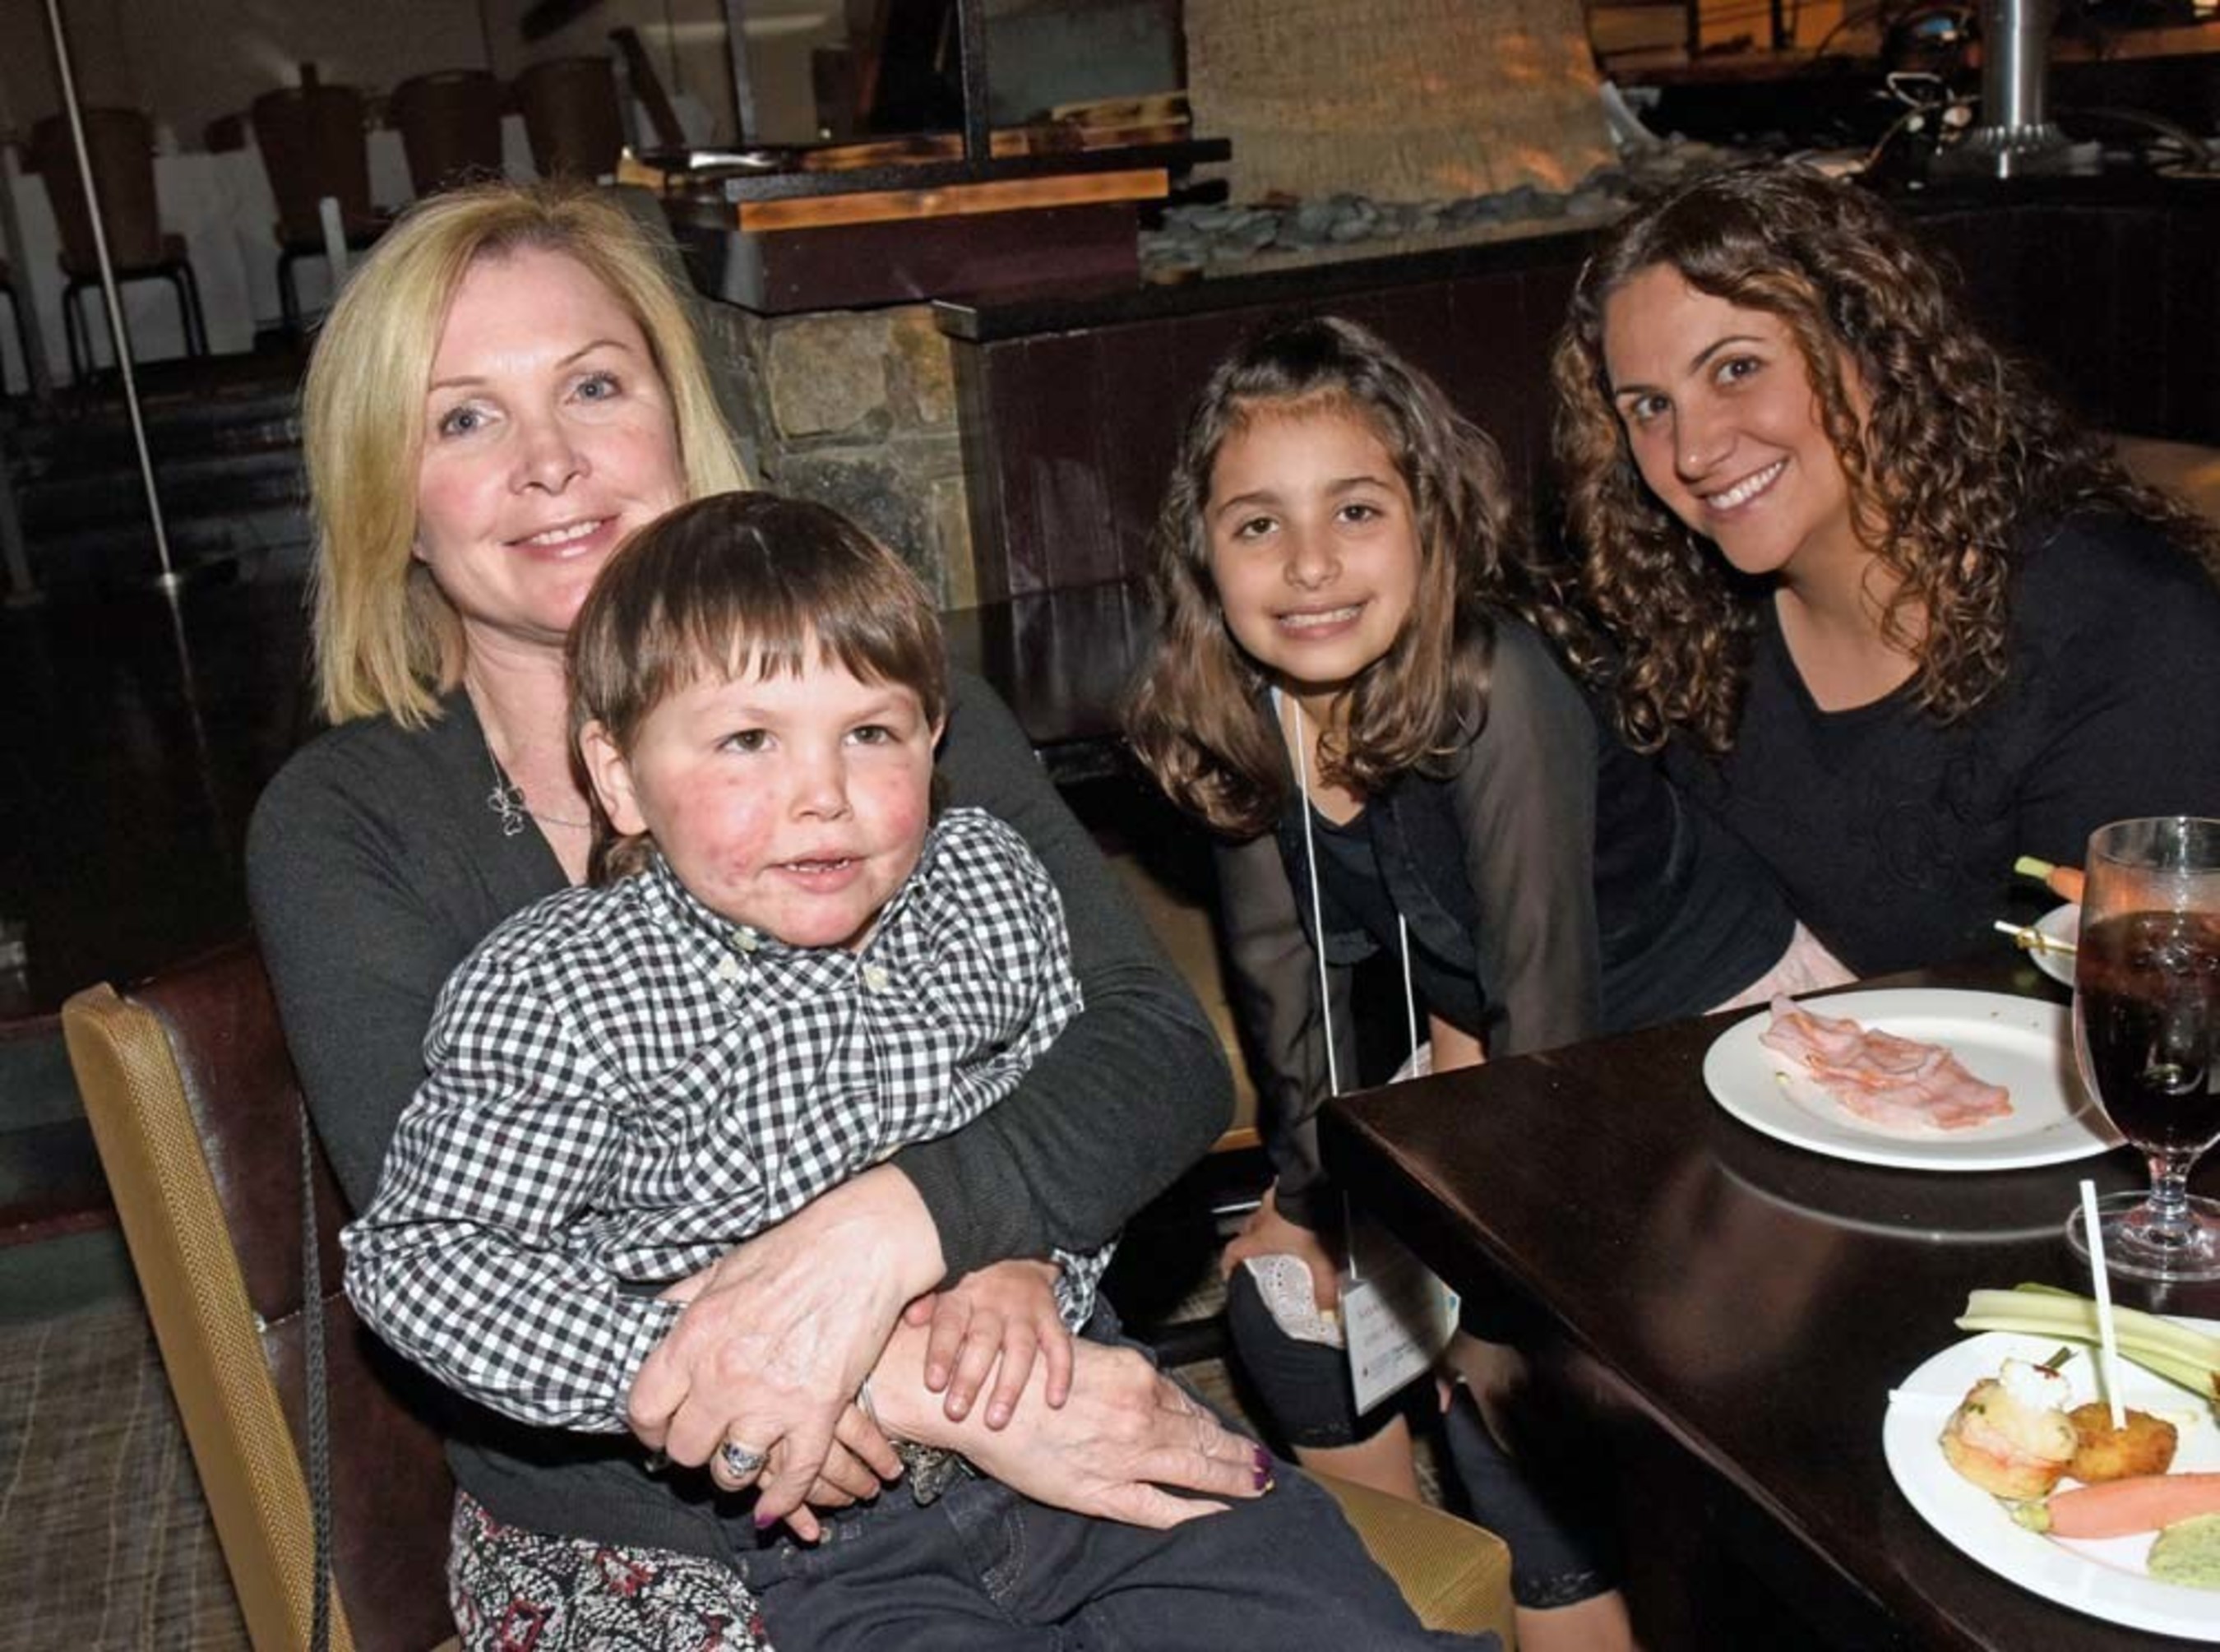 (Boy & Girl of the Year with Parents) Juls Barbeau of Sandy Hook, CT--mother of Ryan Costa, Savanna DiFatta, 2016 Girl of the Year of New Rochelle, NY, Jenn DiFatta of New Rochelle, NY--mother of Savanna DiFatta, Ryan Costa, 2016 Boy of the Year of Sandy Hook, CT.